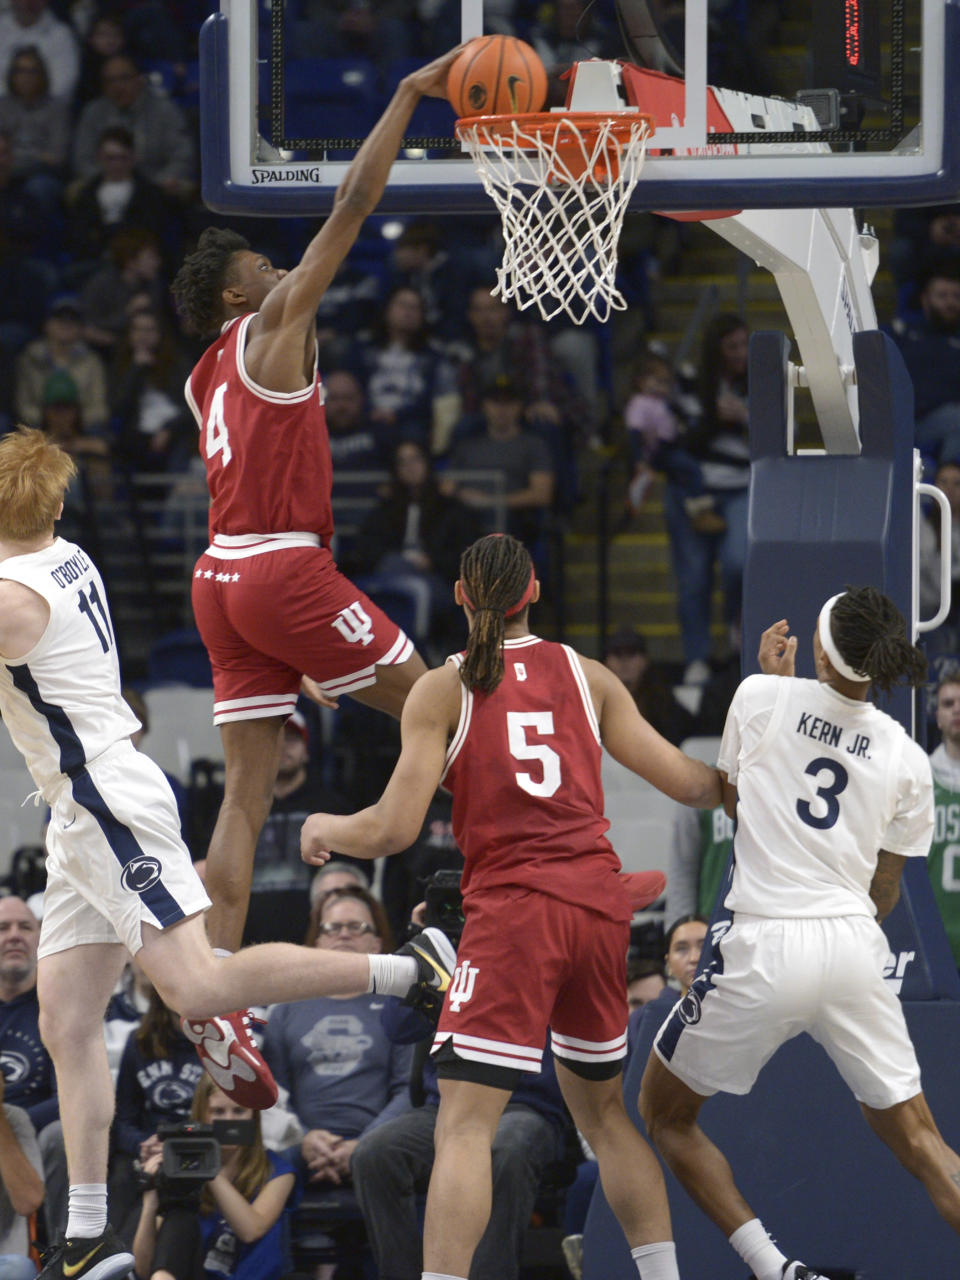 Indiana's Anthony Walker (4) dunks in front of Indiana's Malik Reneau (5) and Penn State's Nick Kern Jr. (3) during the first half of an NCAA college basketball game Saturday Feb. 24, 2024, in State College, Pa. (AP Photo/Gary M. Baranec)